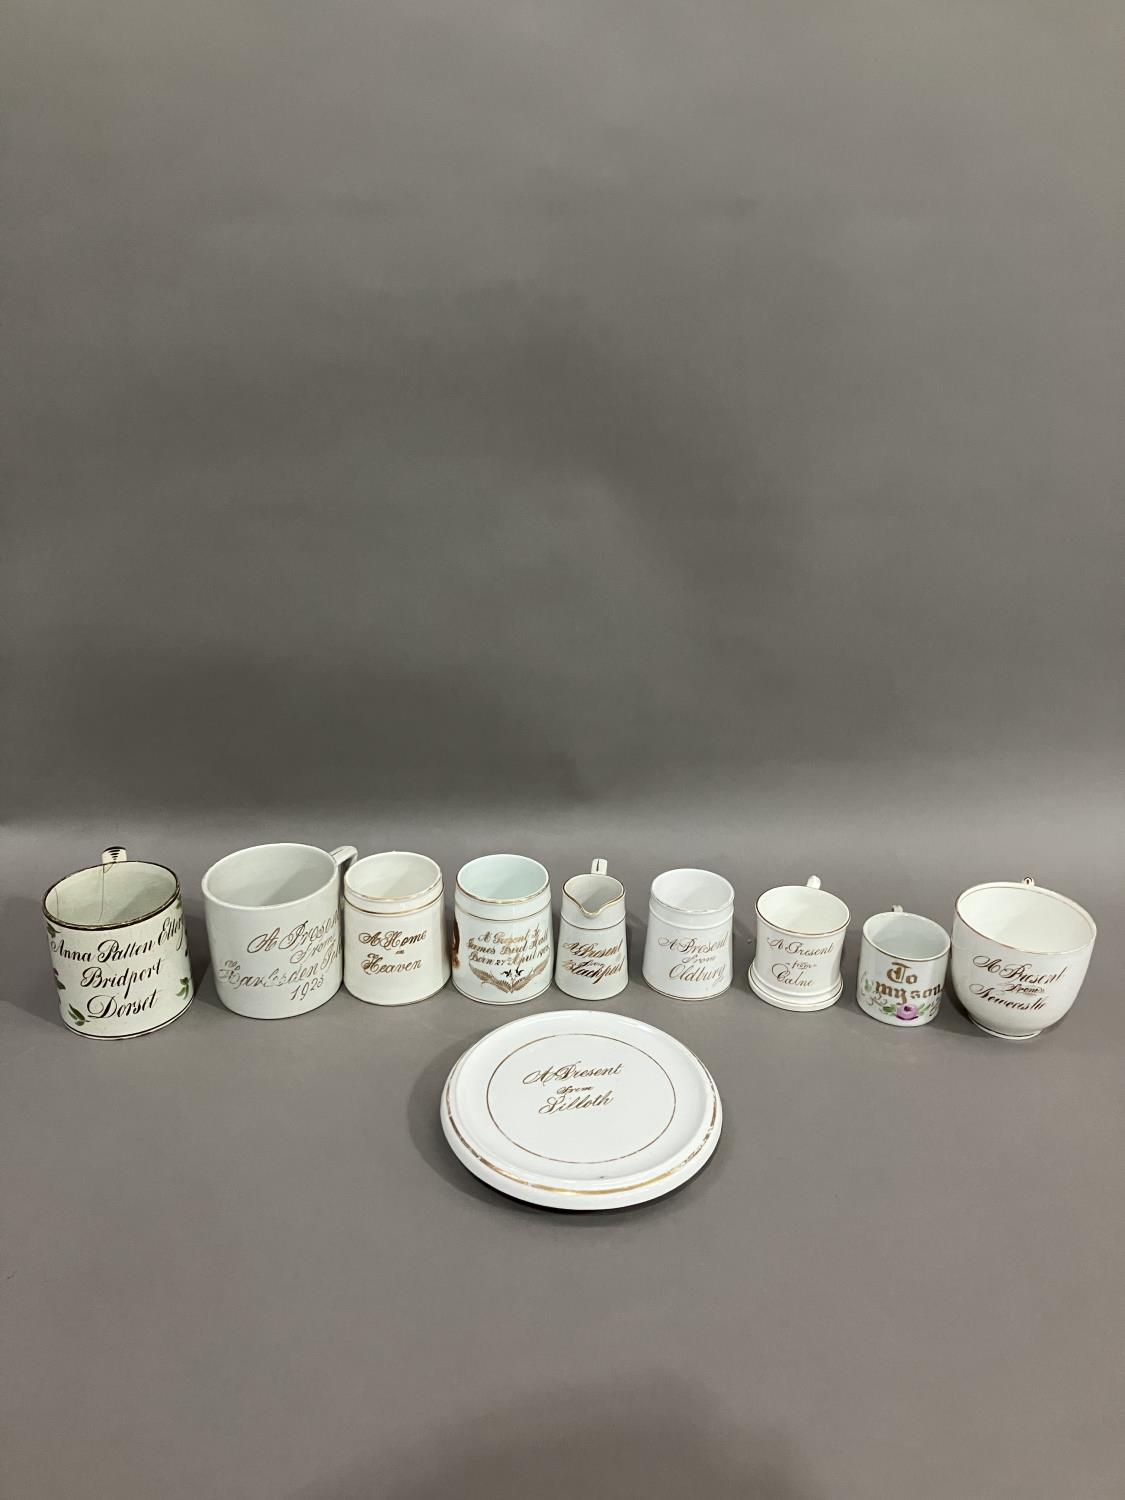 A collection of 19th and early 20th century named mugs, jugs and teapot stand, some souvenirs from